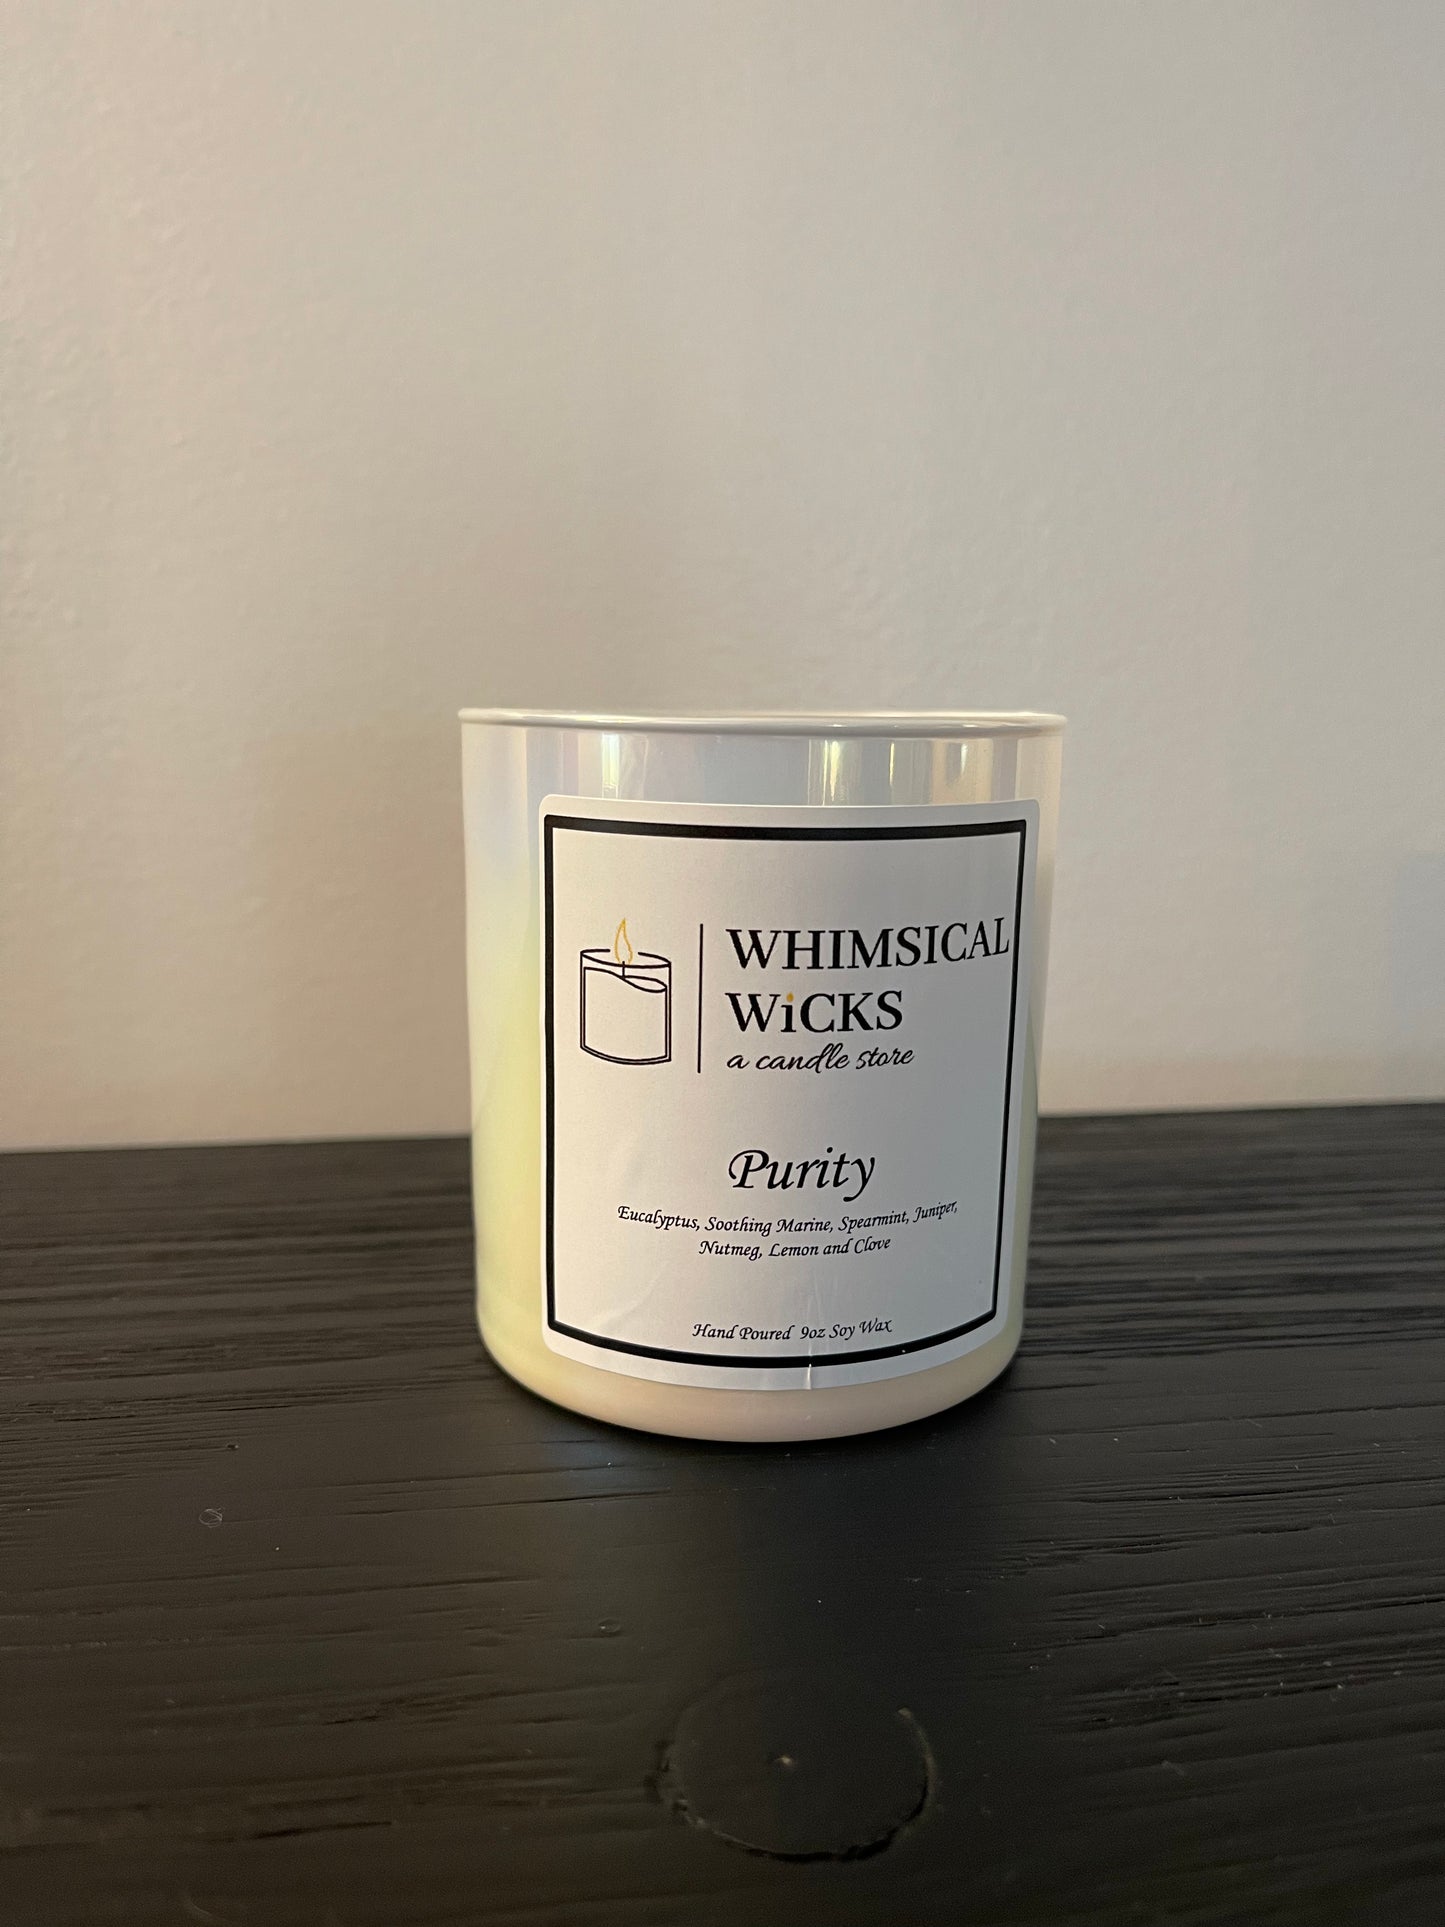 Whimsical Wicks - Purity 9oz Boxed Candle